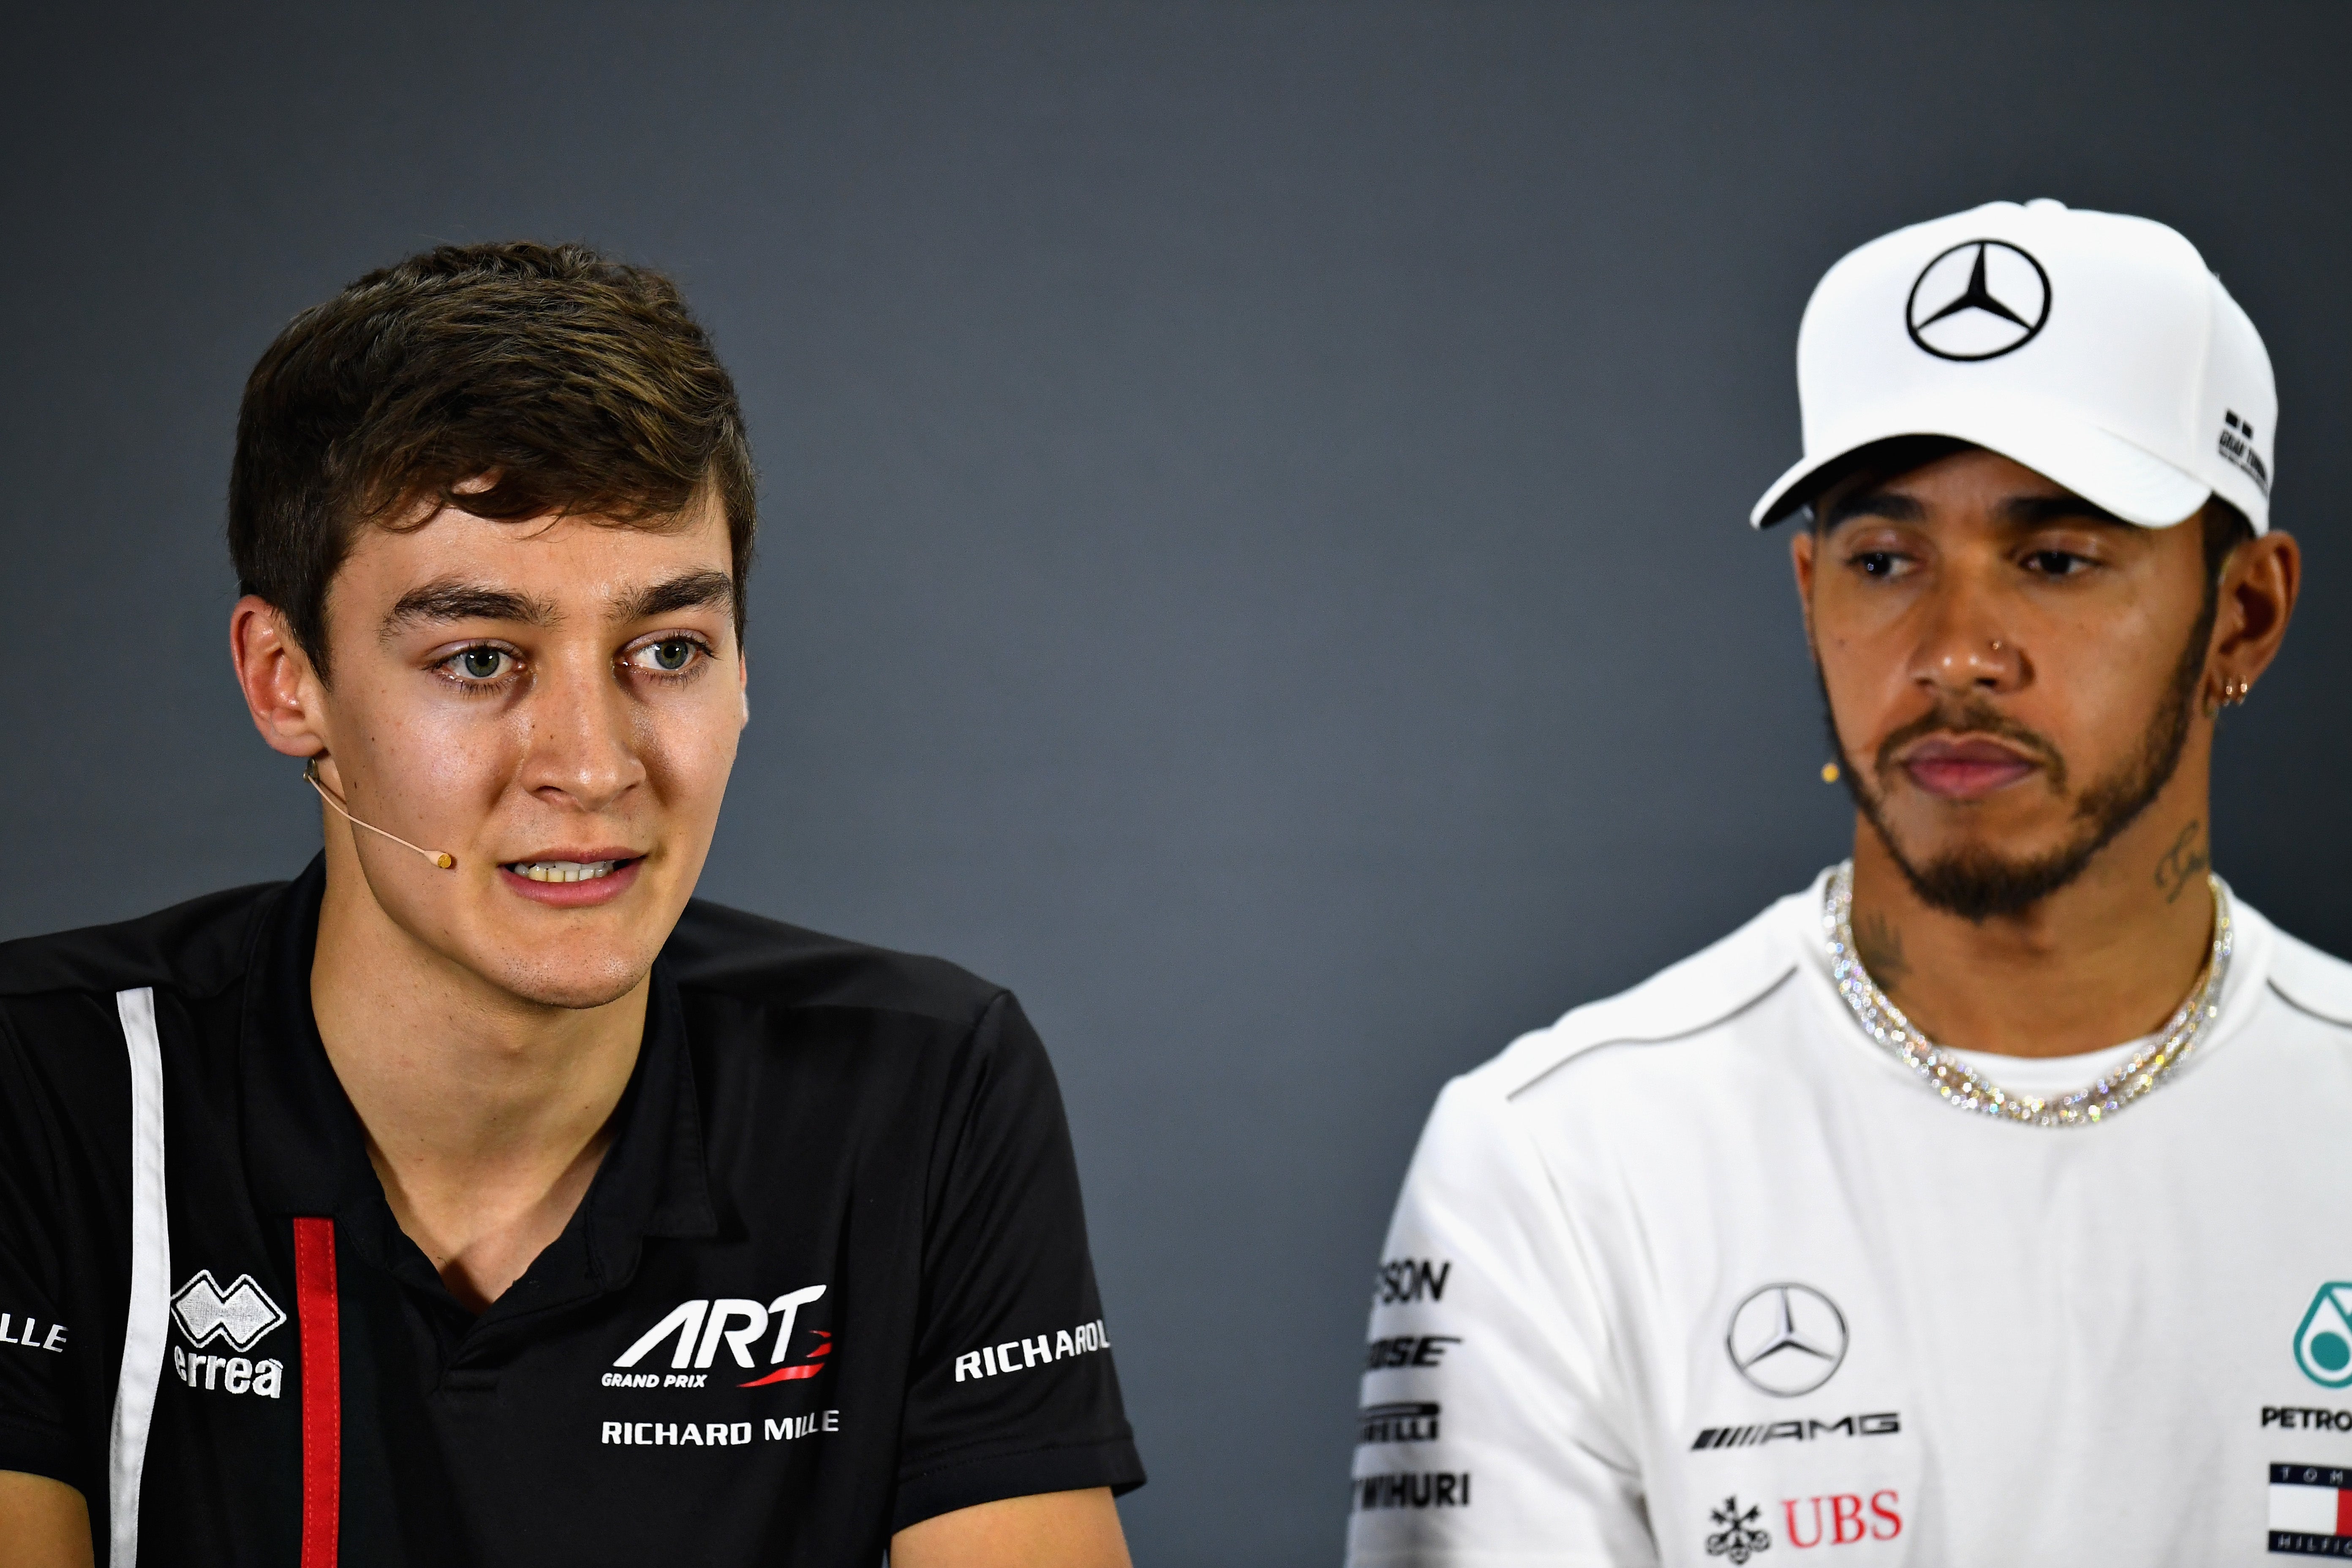 George Russell and Lewis Hamilton will be teammates at Mercedes next season